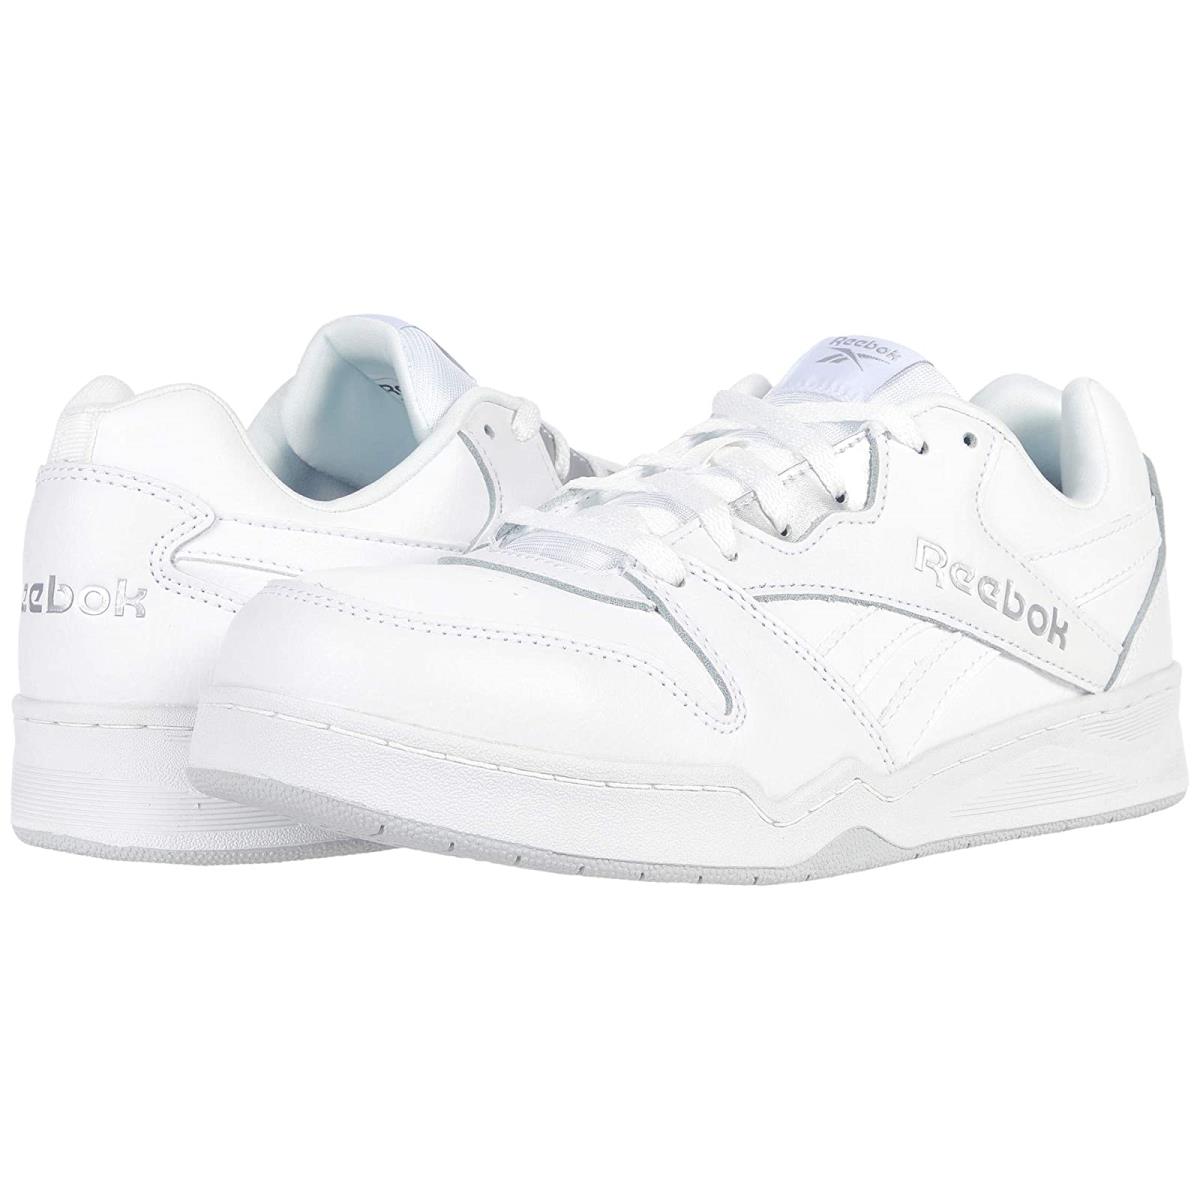 Man`s Sneakers Athletic Shoes Reebok Work BB4500 Work SD White/Grey